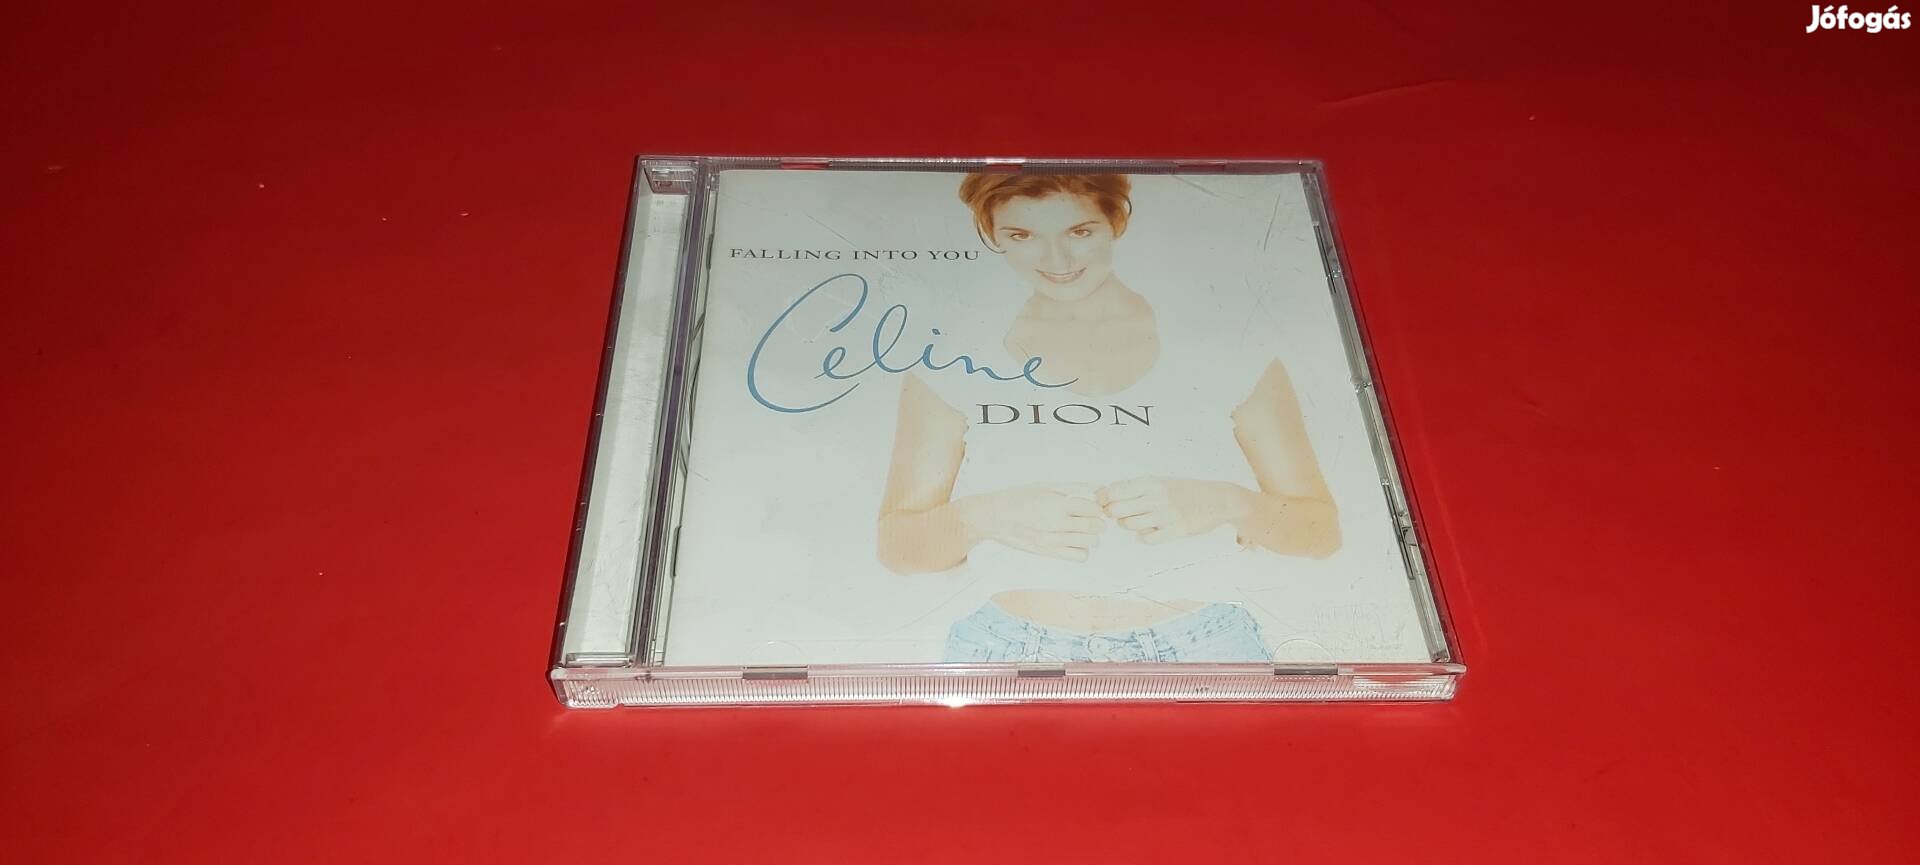 Celine Dion Falling in to you Cd 1996